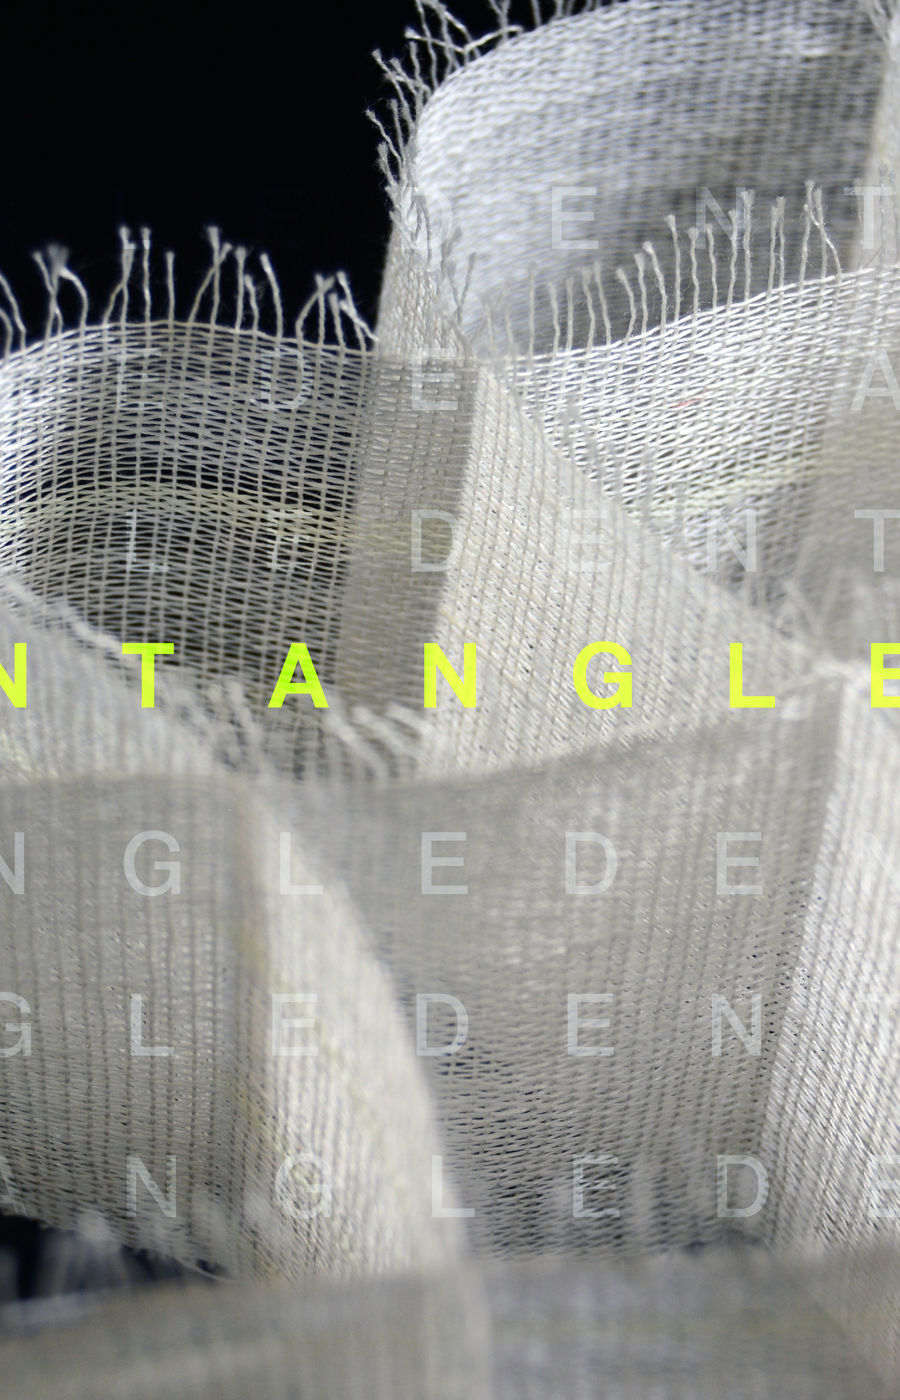 Entangled exhibition, title image. Image by Mithila Mohan. Photo by Maija Vaara.